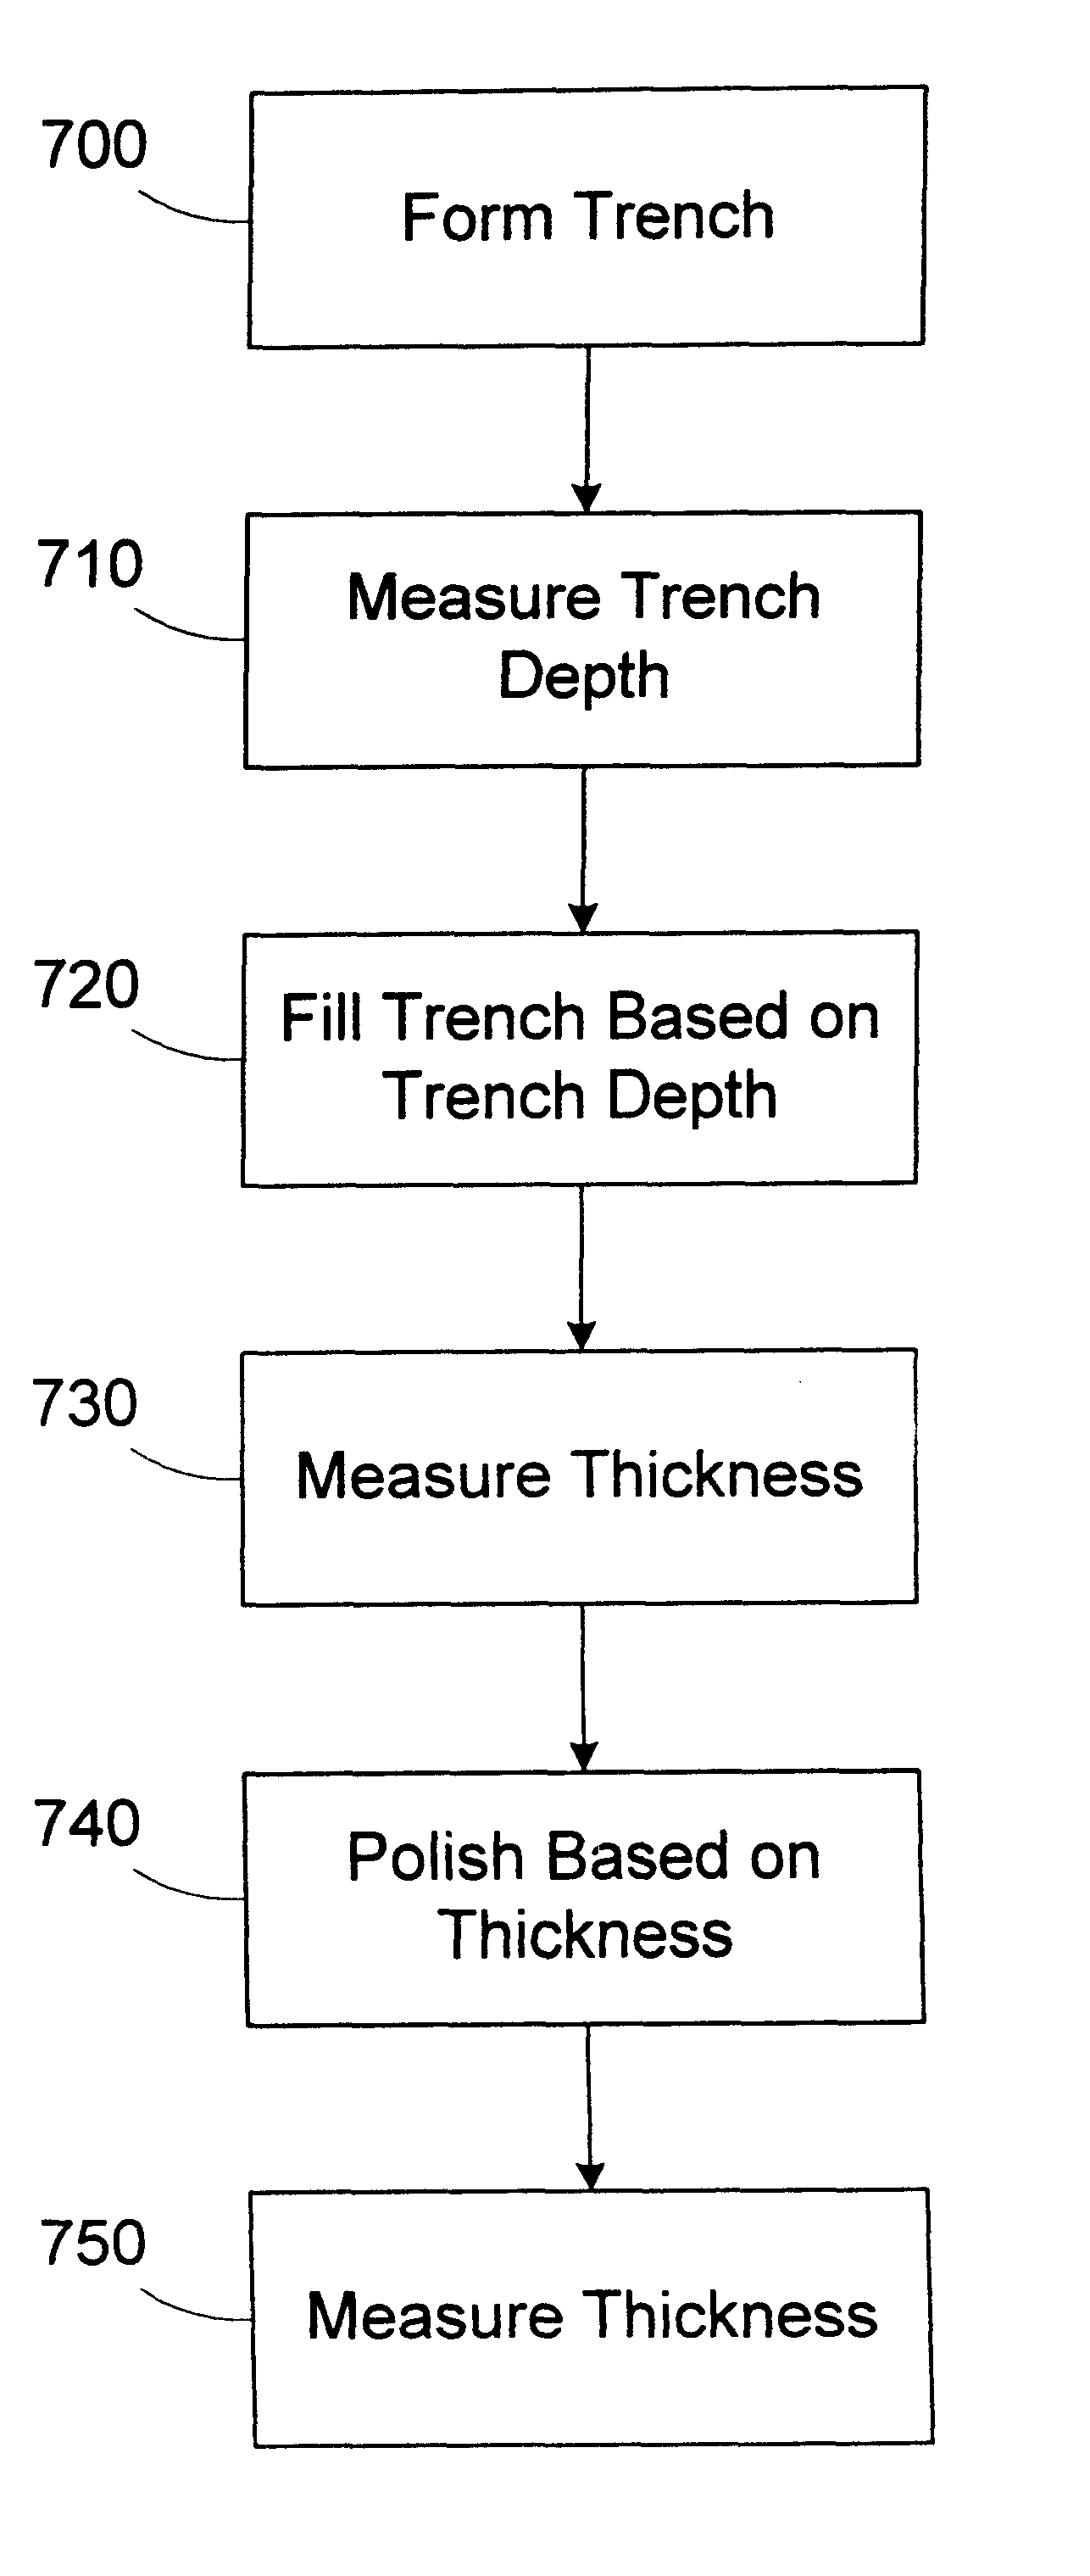 Apparatus for filling trenches